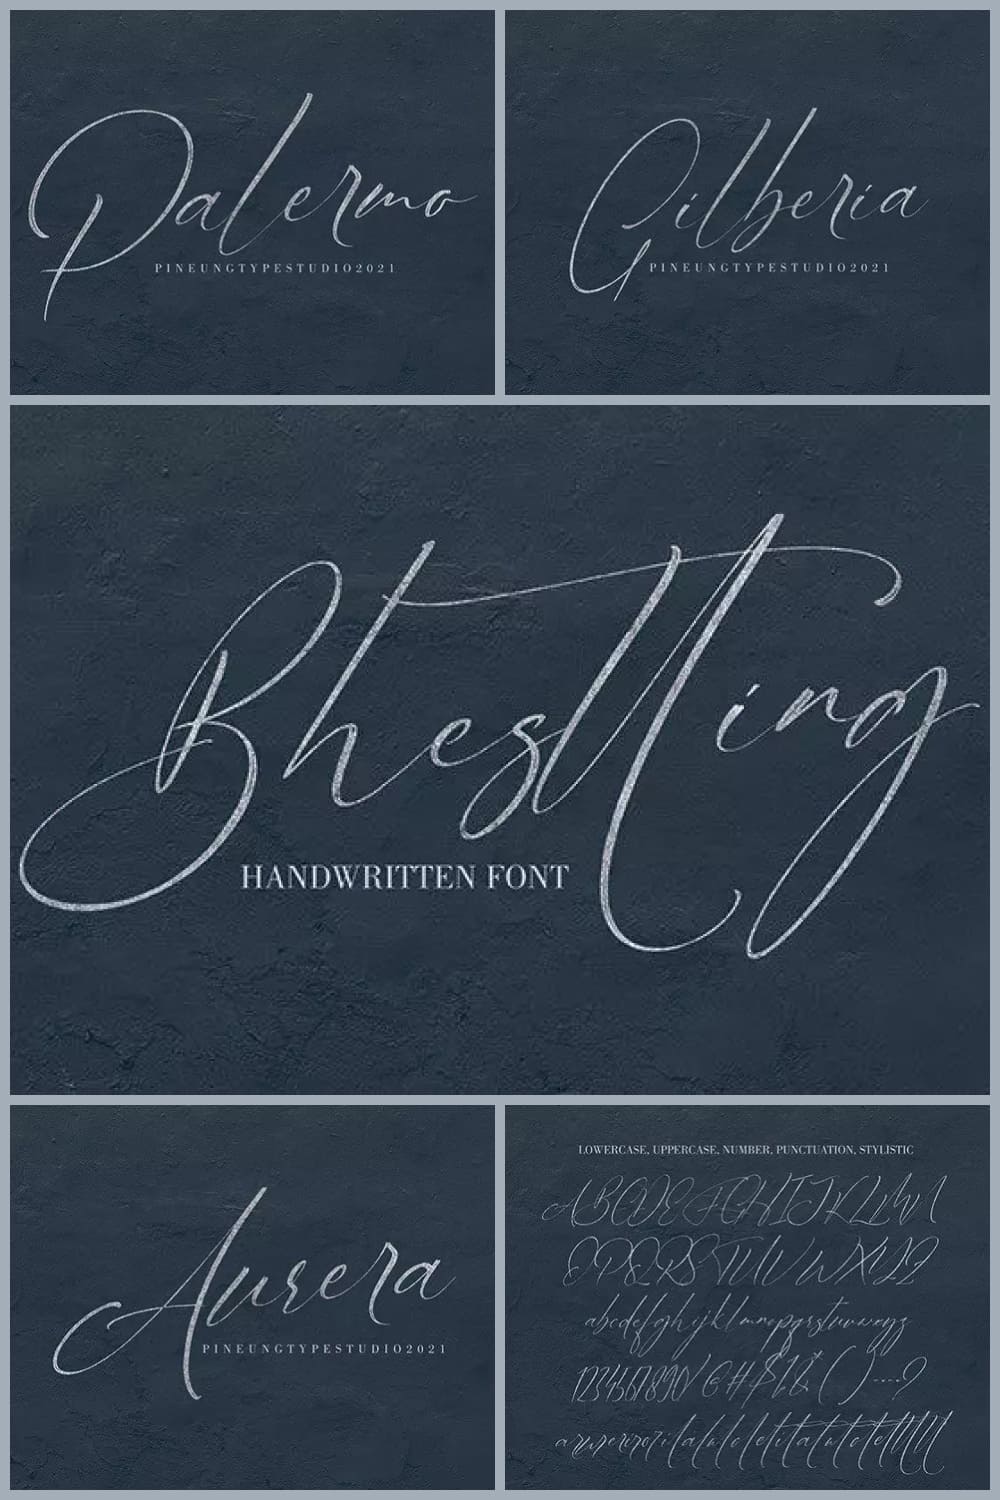 Beautiful, light handwriting font with a unique feel and terrific impact font.